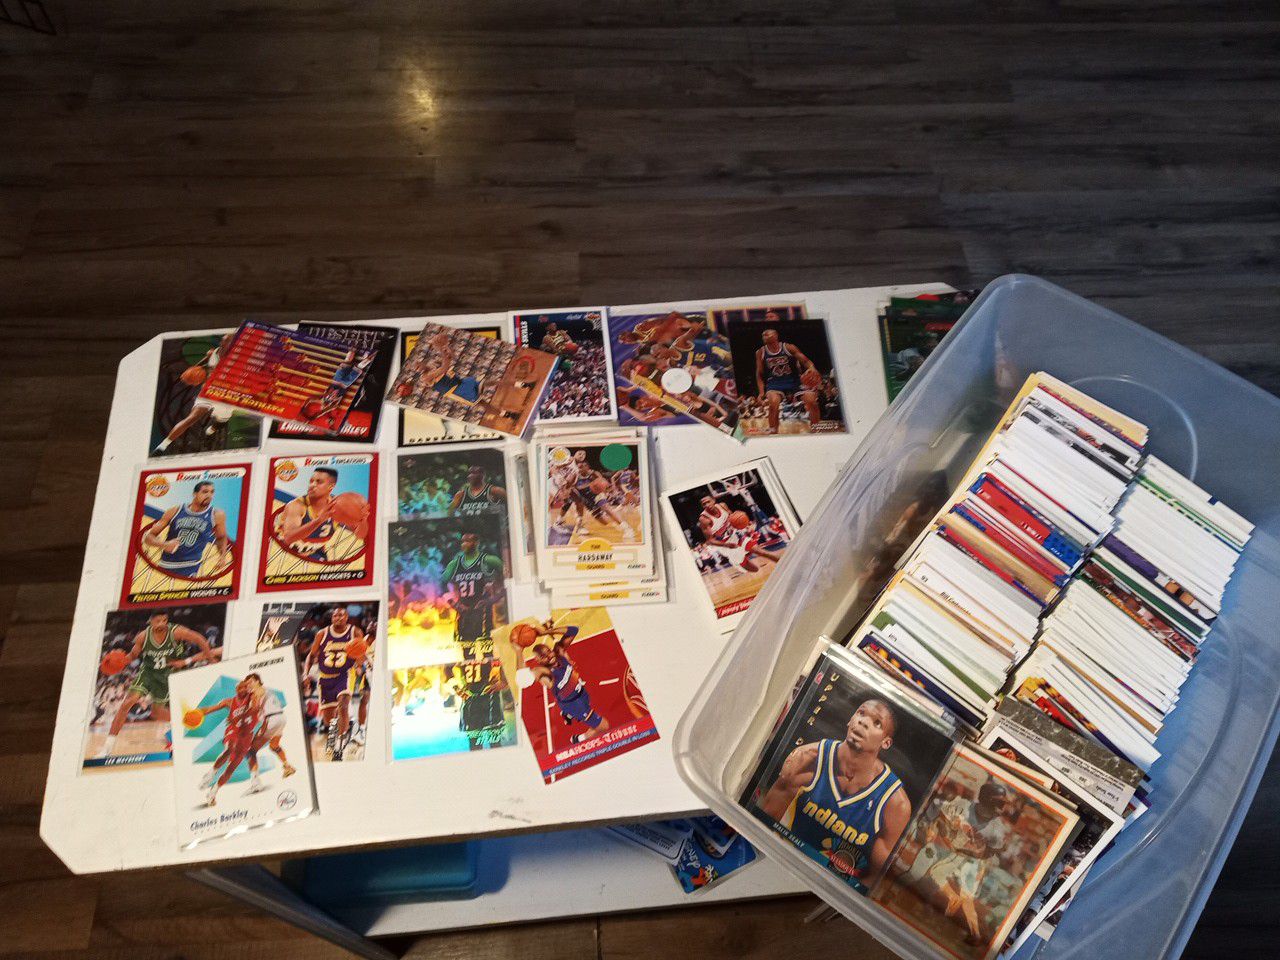 Tons of early 90s basketball cards